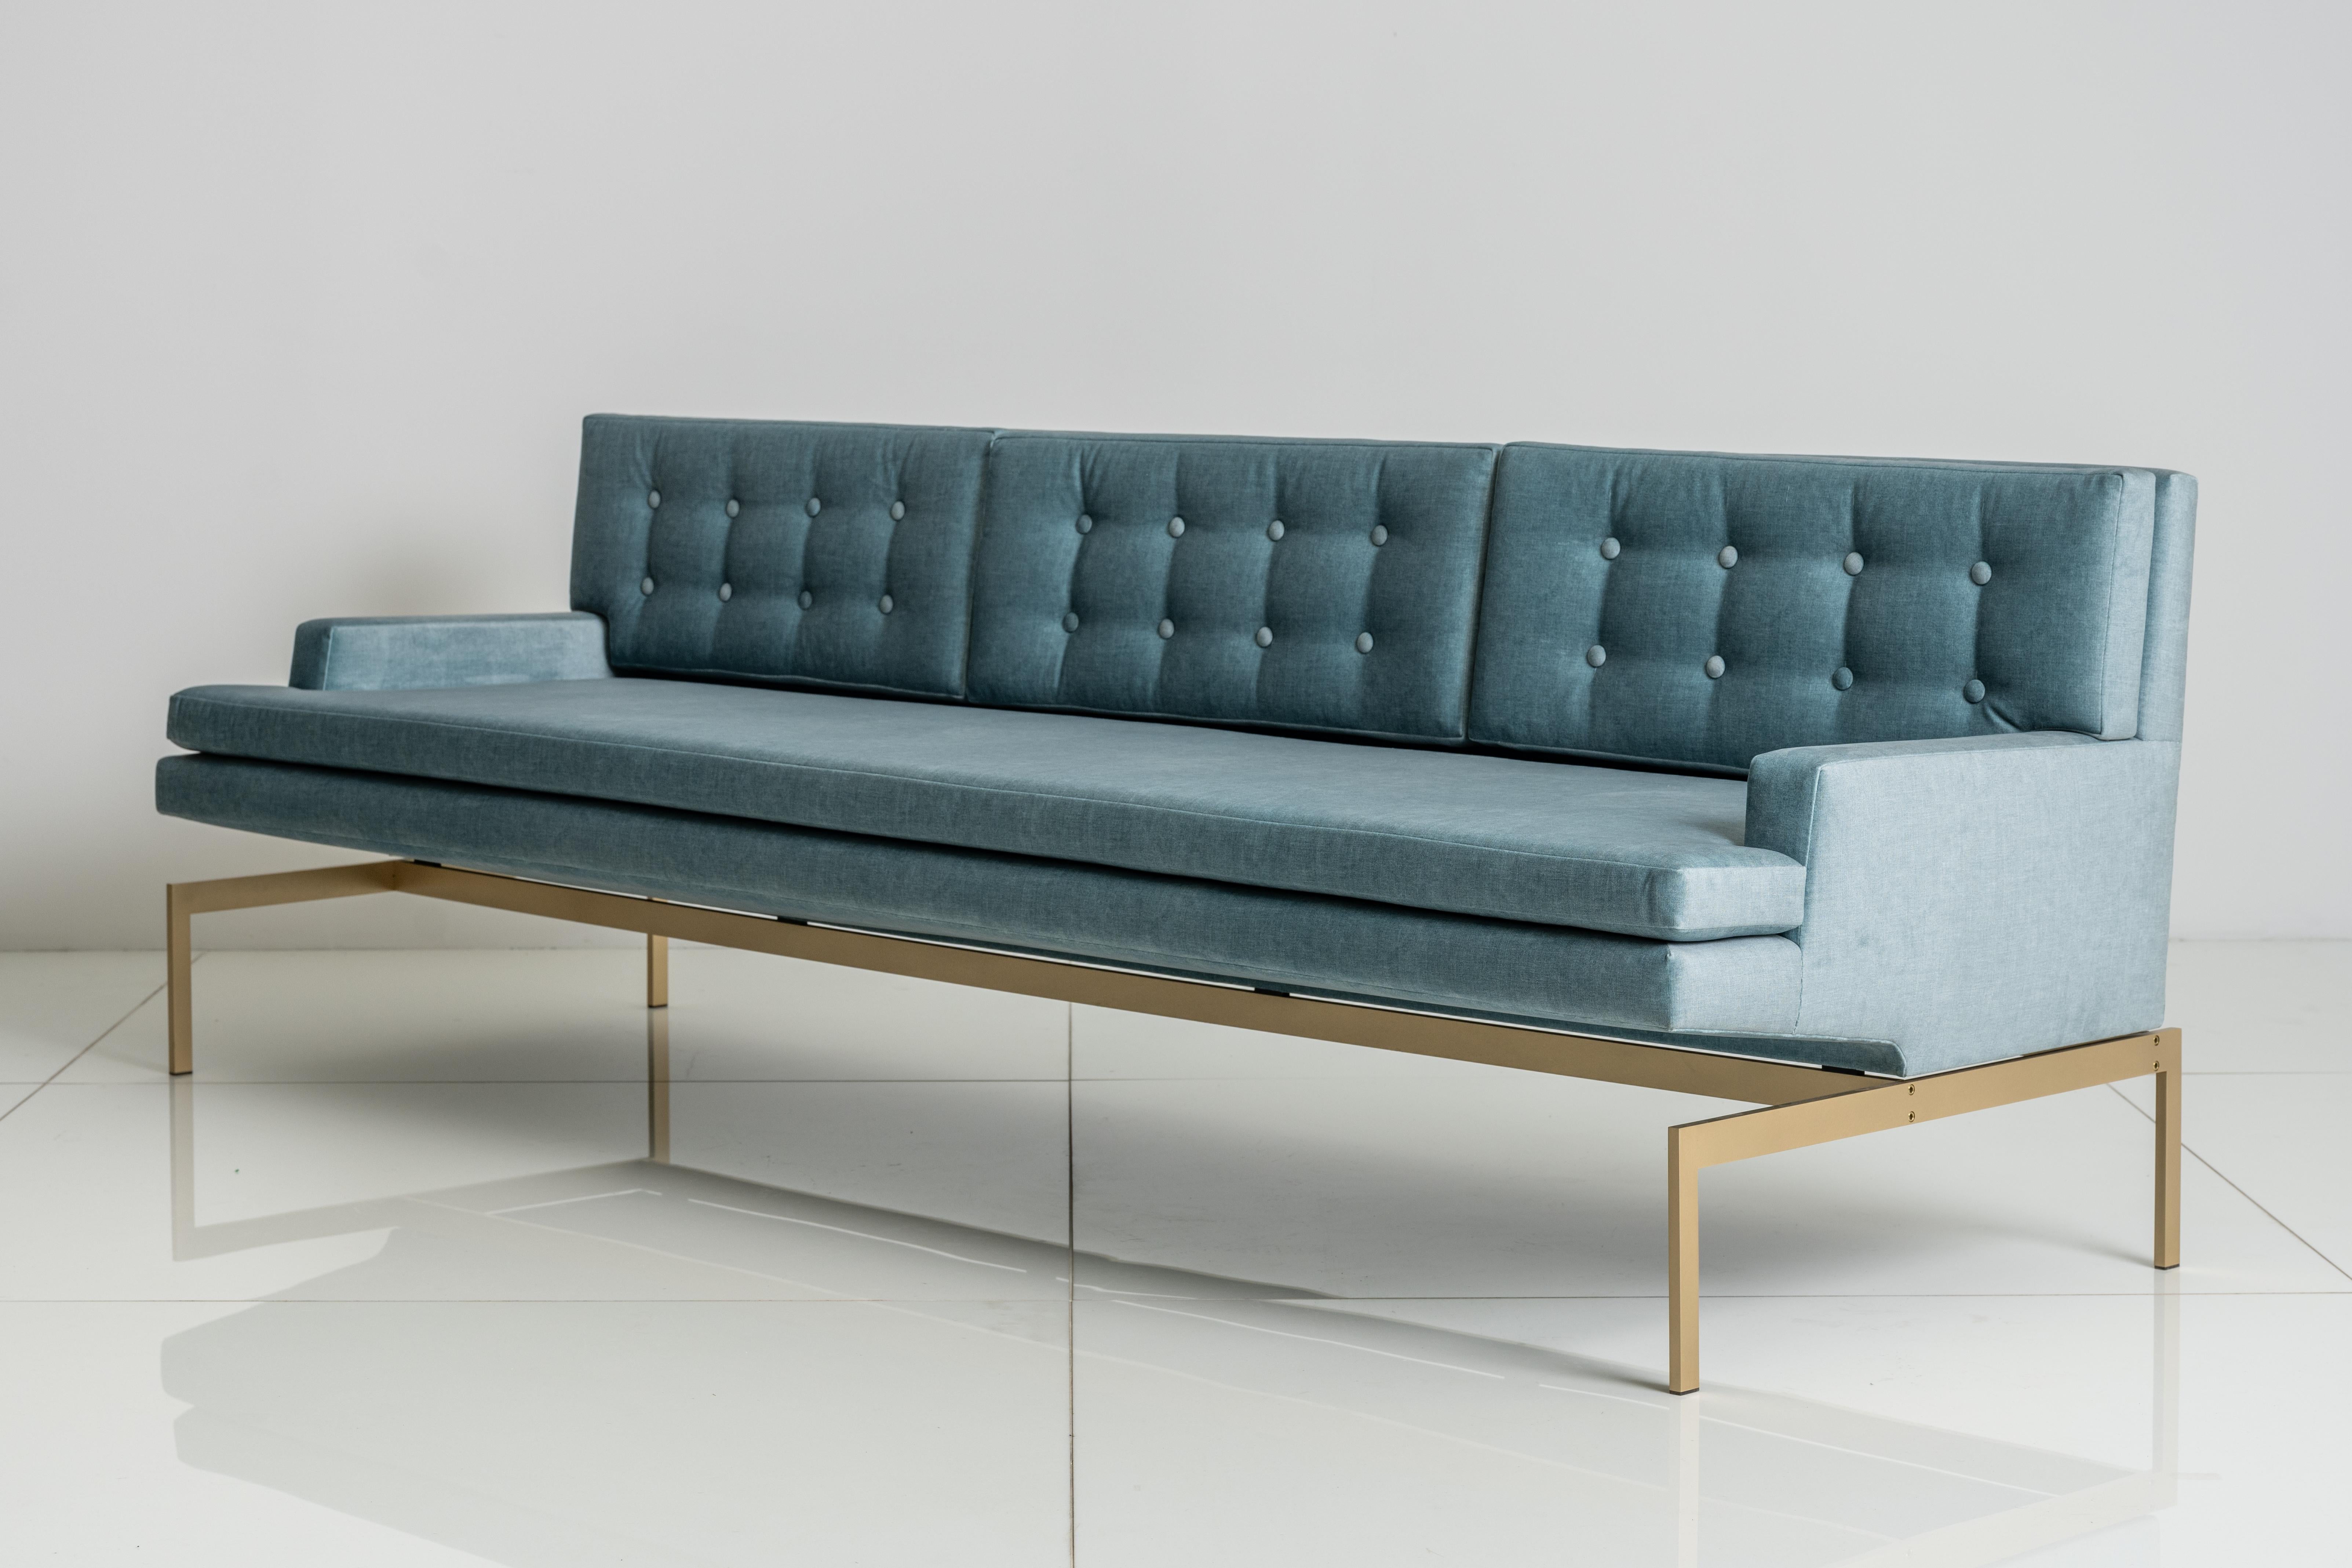 The Mancini Sofa has a seat specially constructed to float above the metal base and give it a singular silhouette. 

Shown with a Silicon Bronze base and Blue Velvet.